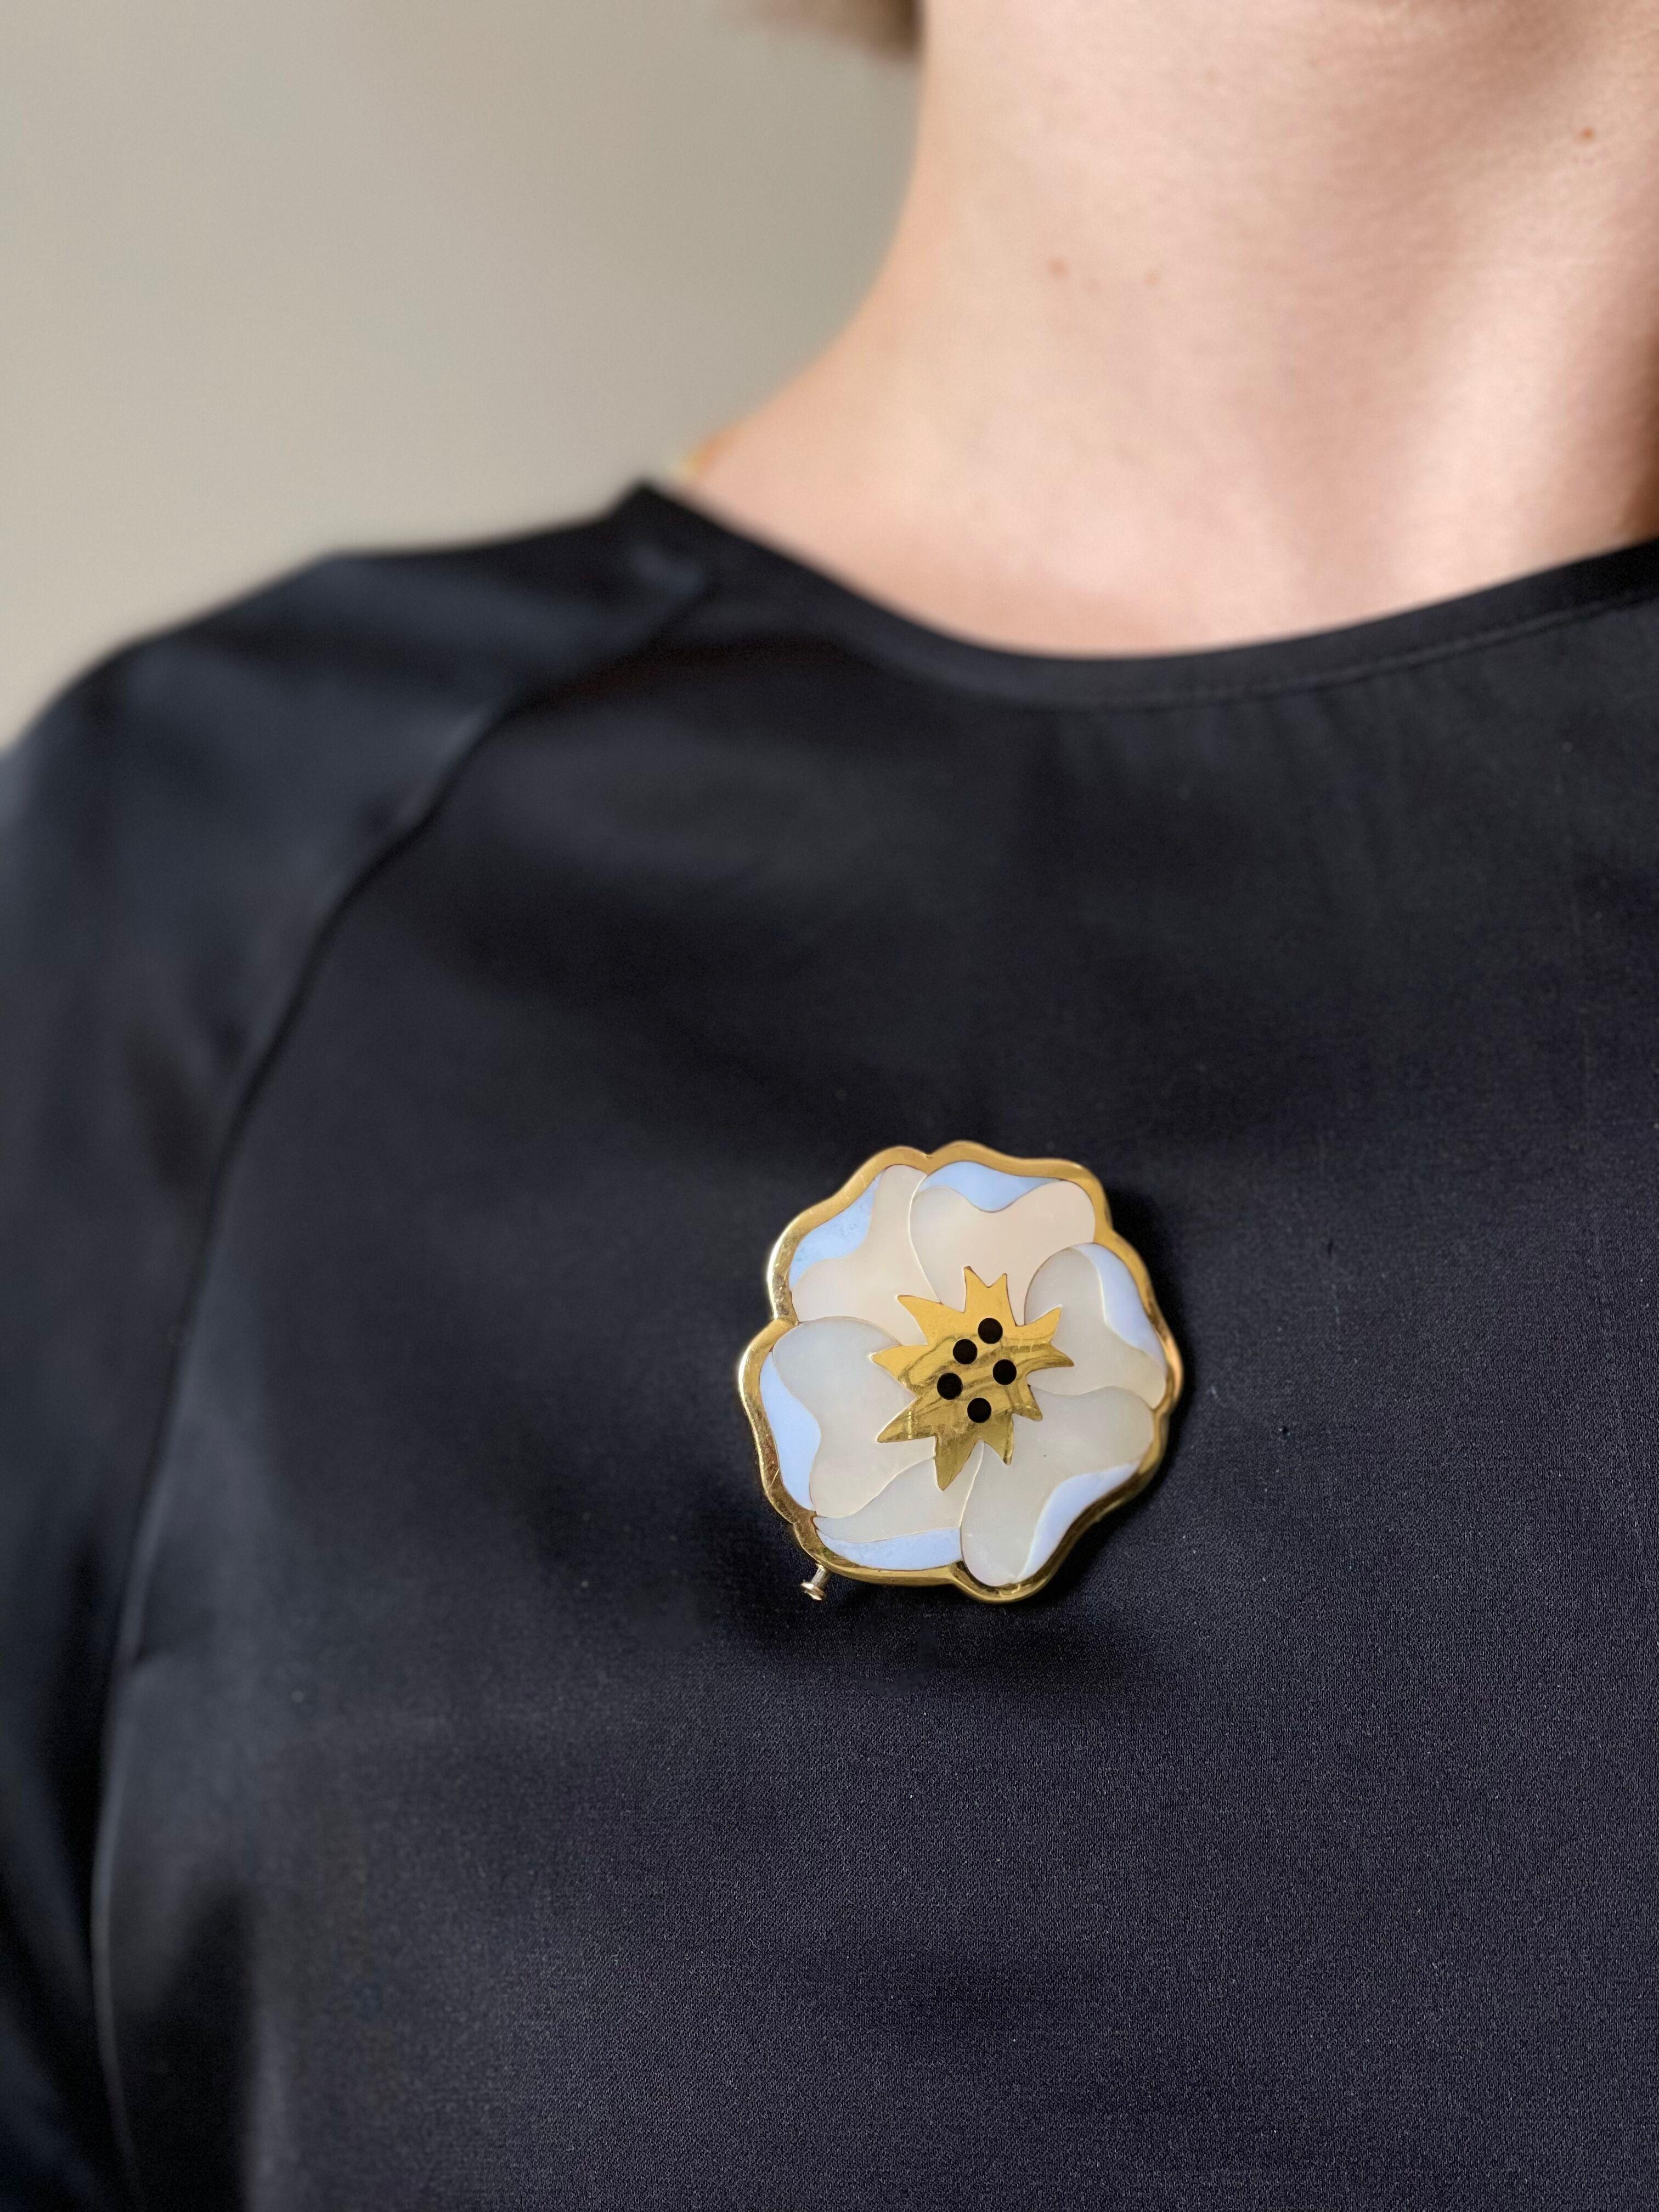 Large 18k gold flower brooch by Tiffany & Co, with onyx and mother of pearl inlay. Brooch measures 1.75